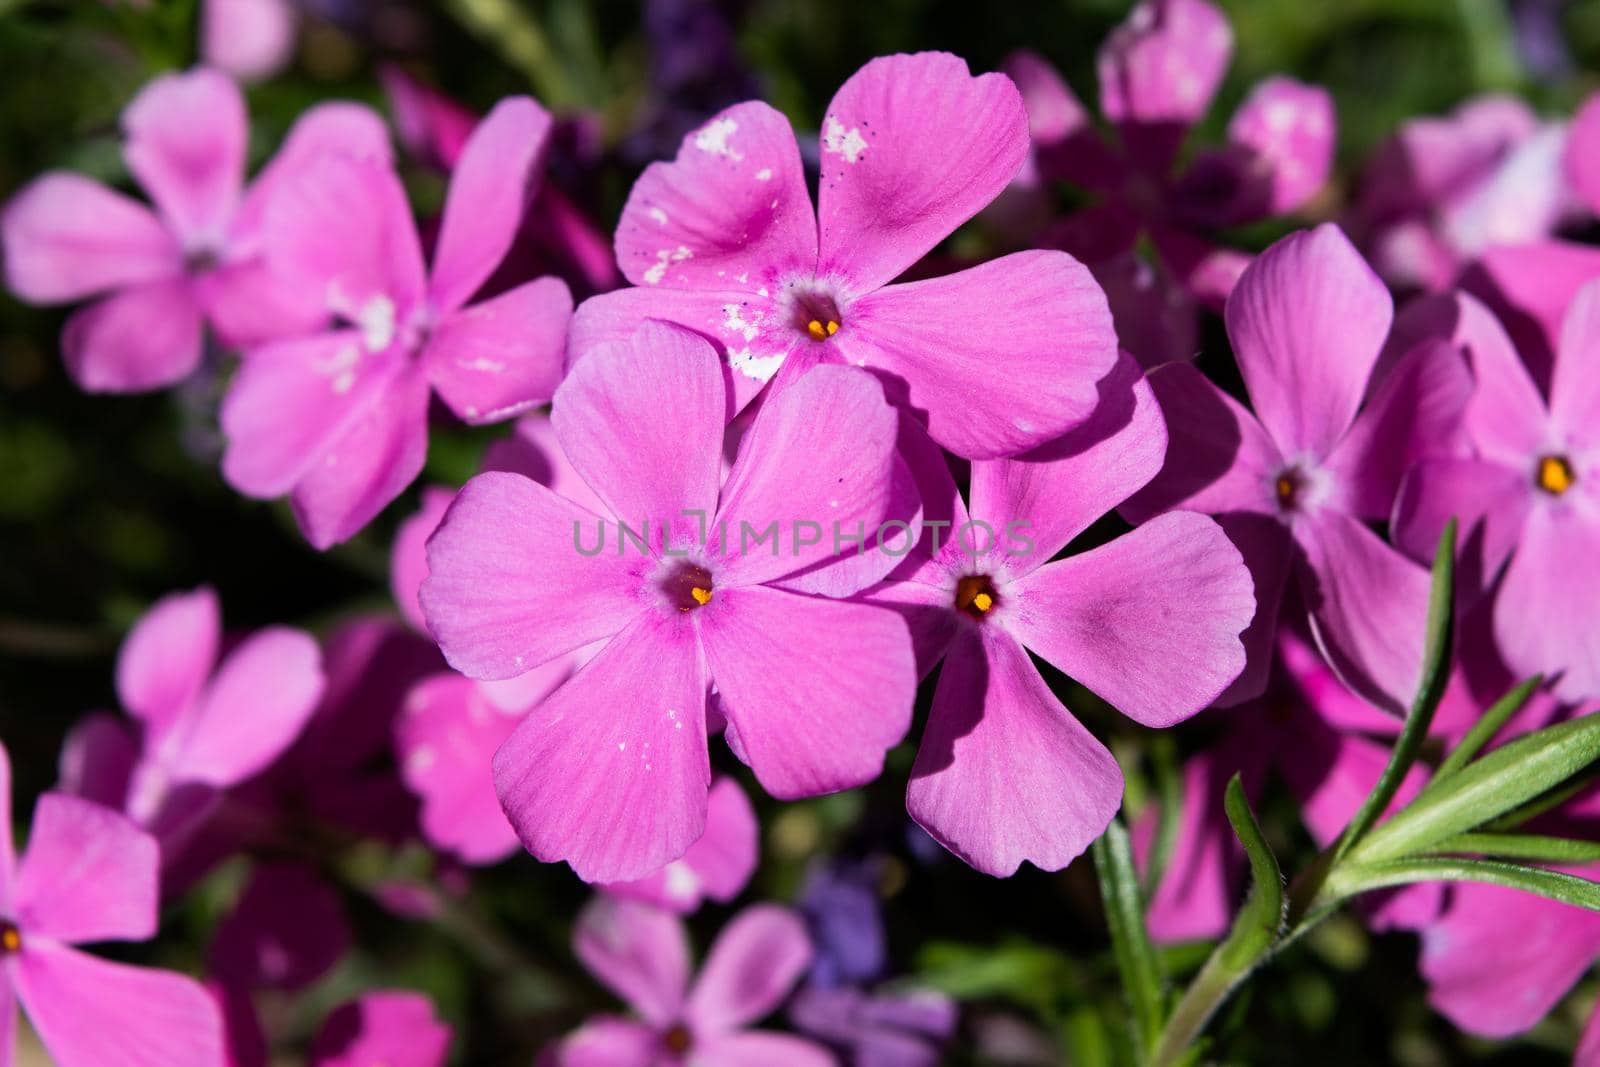 Close-up of a wonderful plant of Phlox paniculata, with its characteristic colorful flowers.